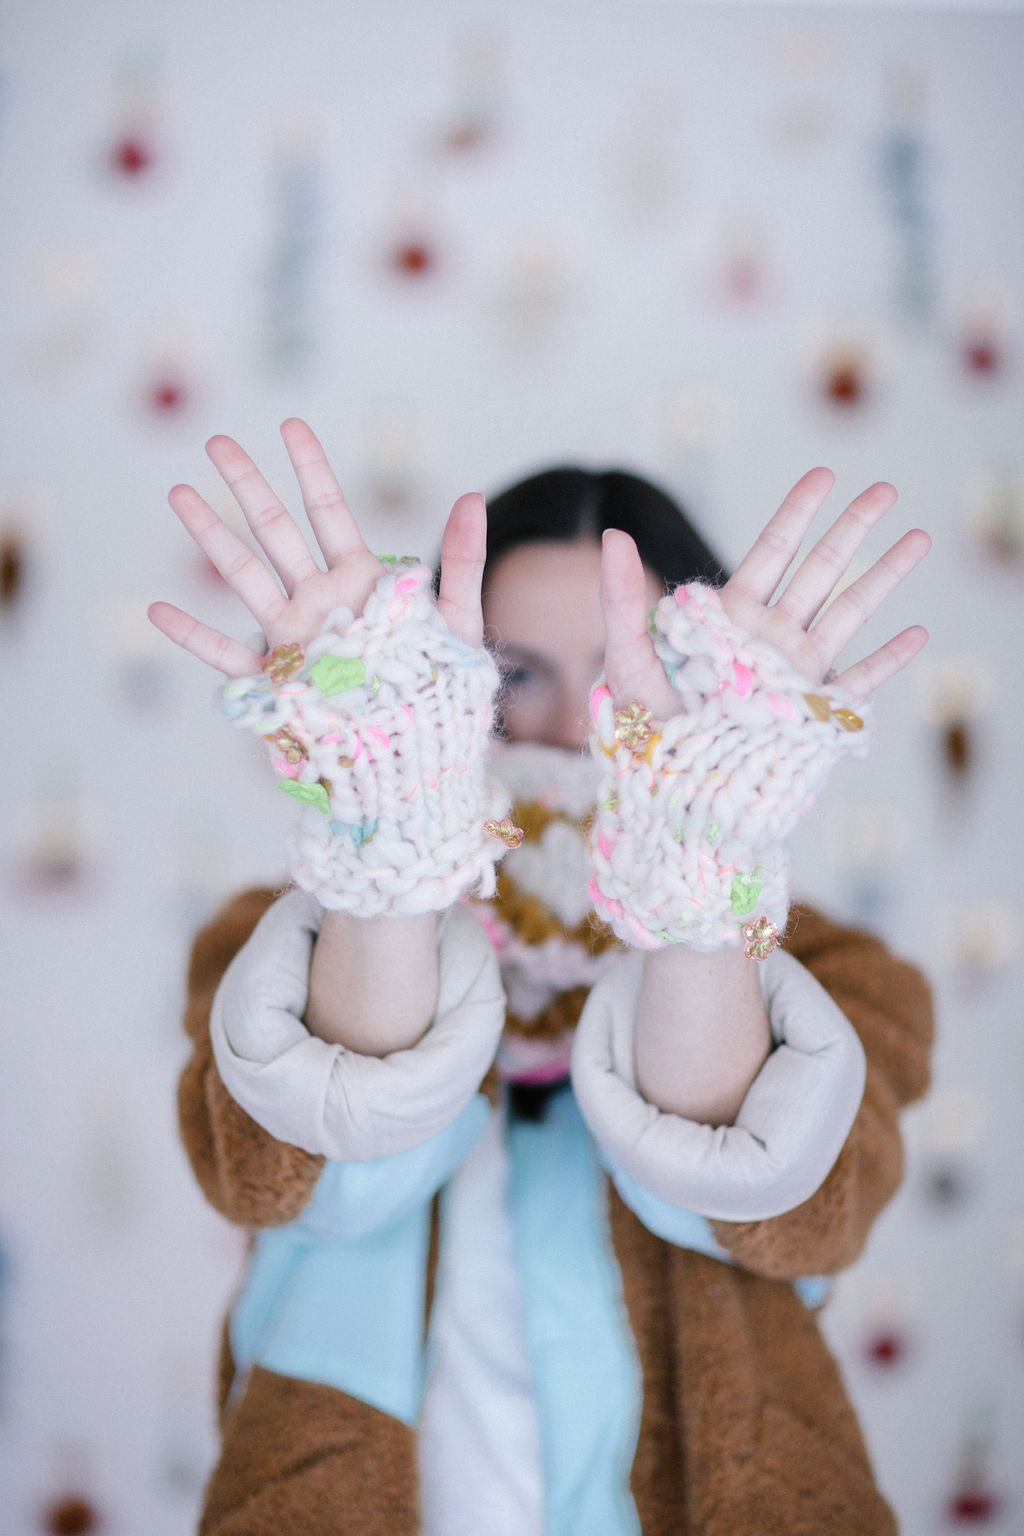 Flower Power Moto Mitts Knit Collage Pattern